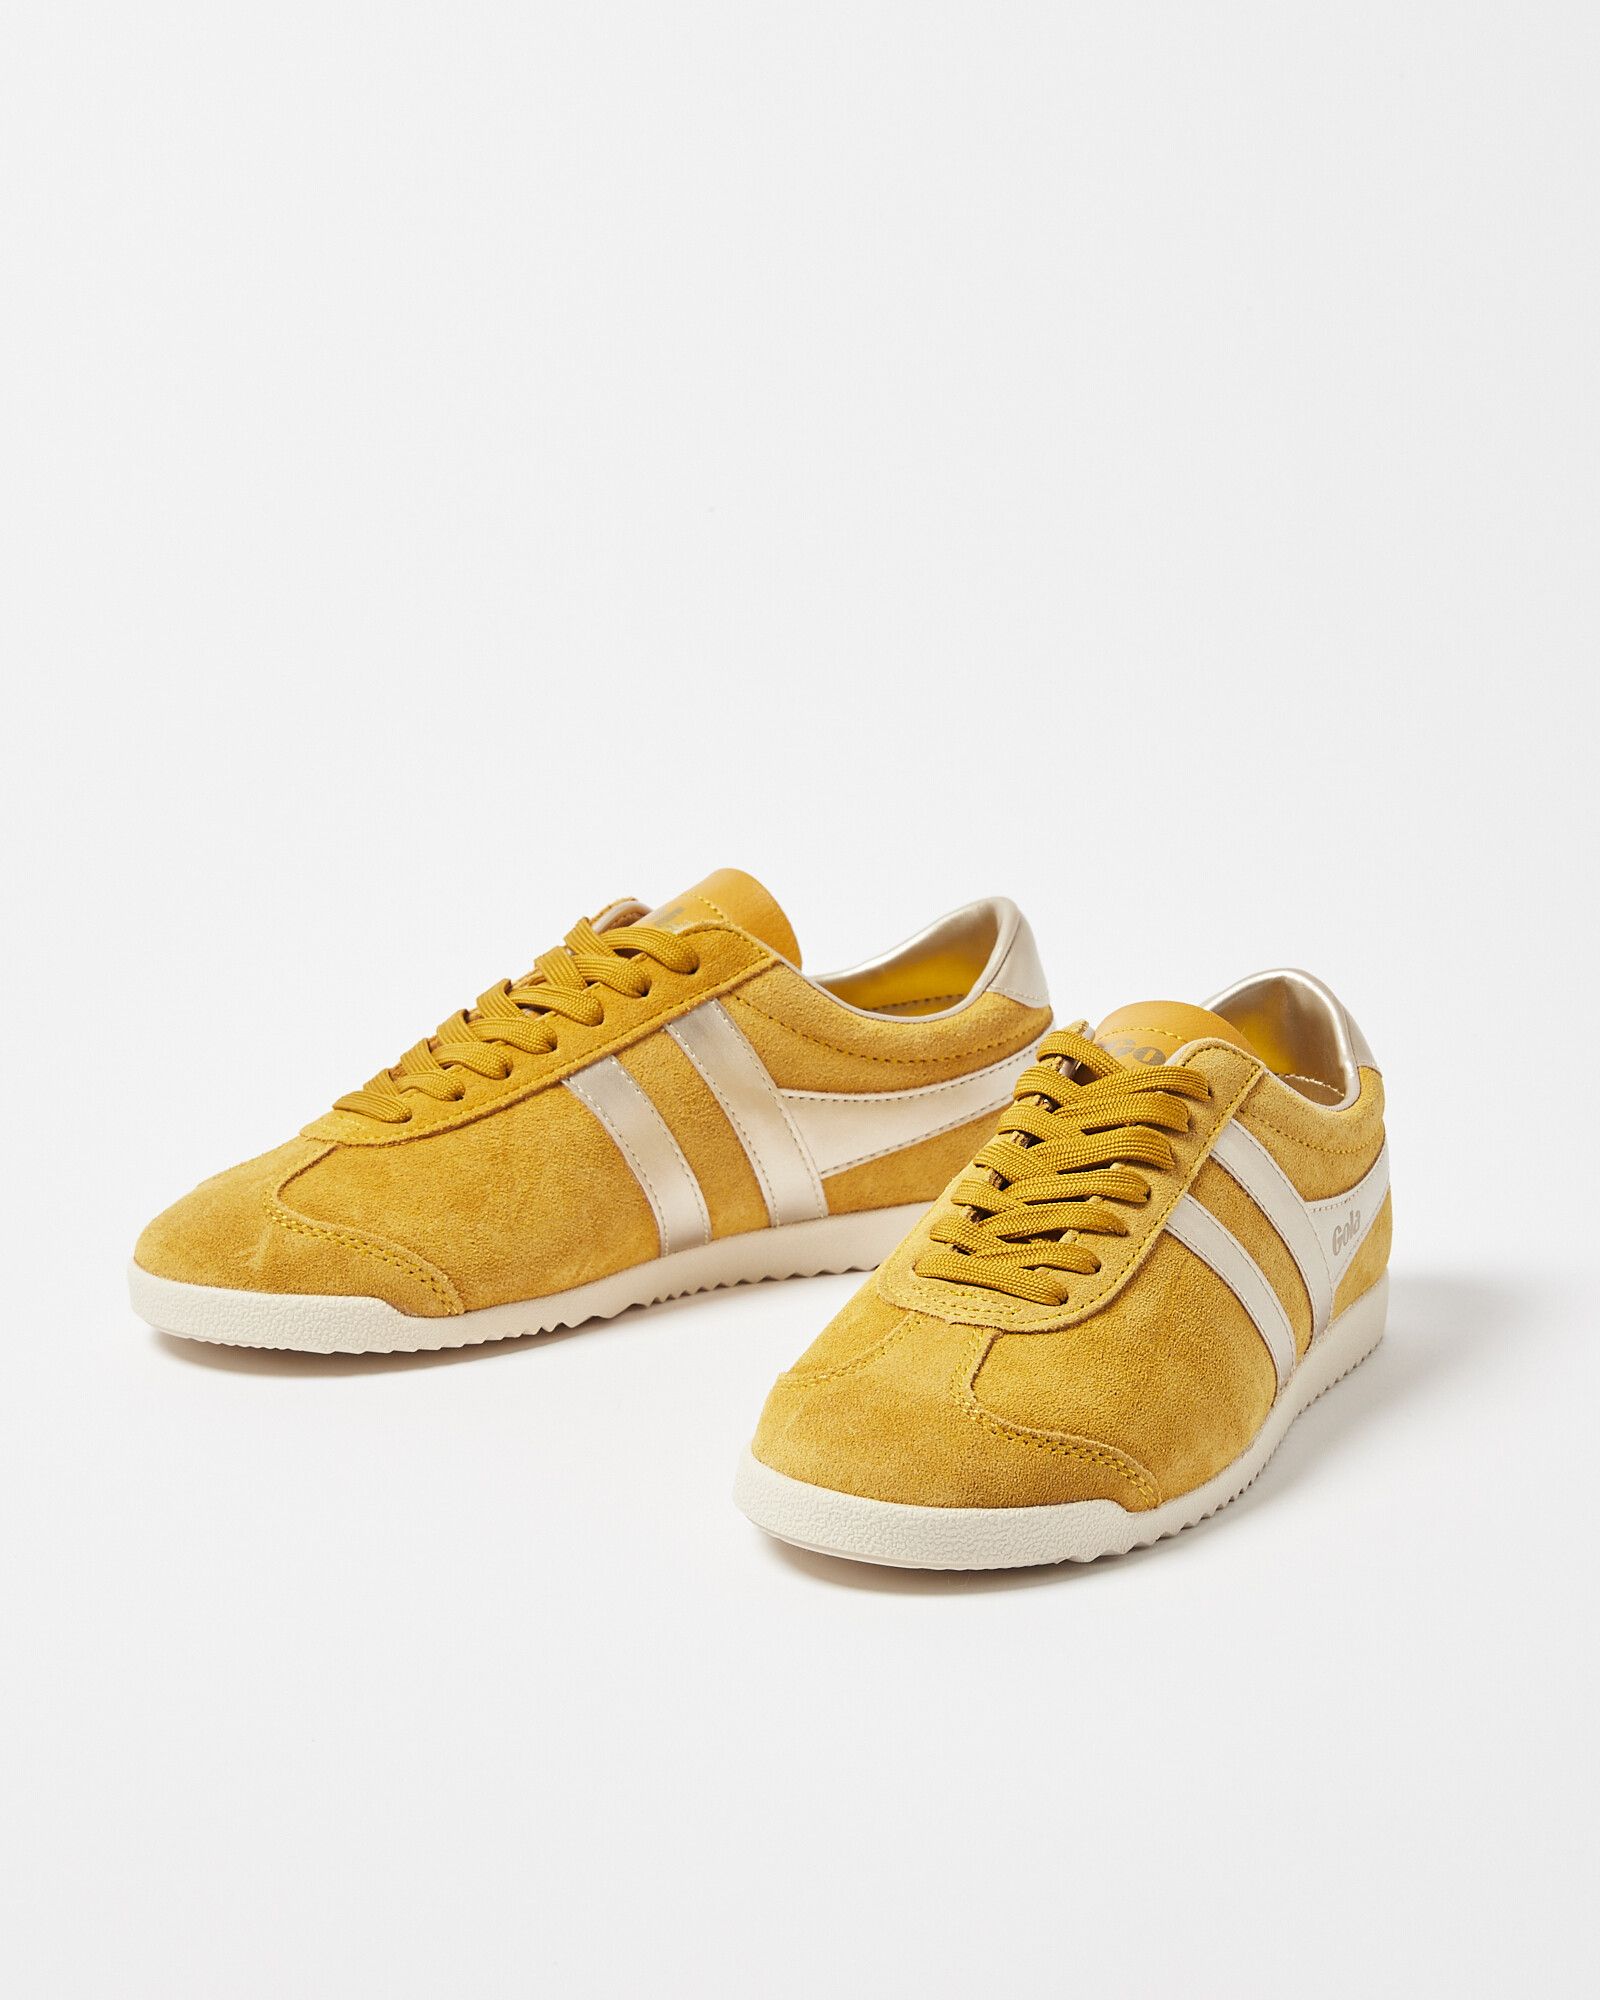 Gola Pearl Yellow Leather Trainers | Oliver Bonas